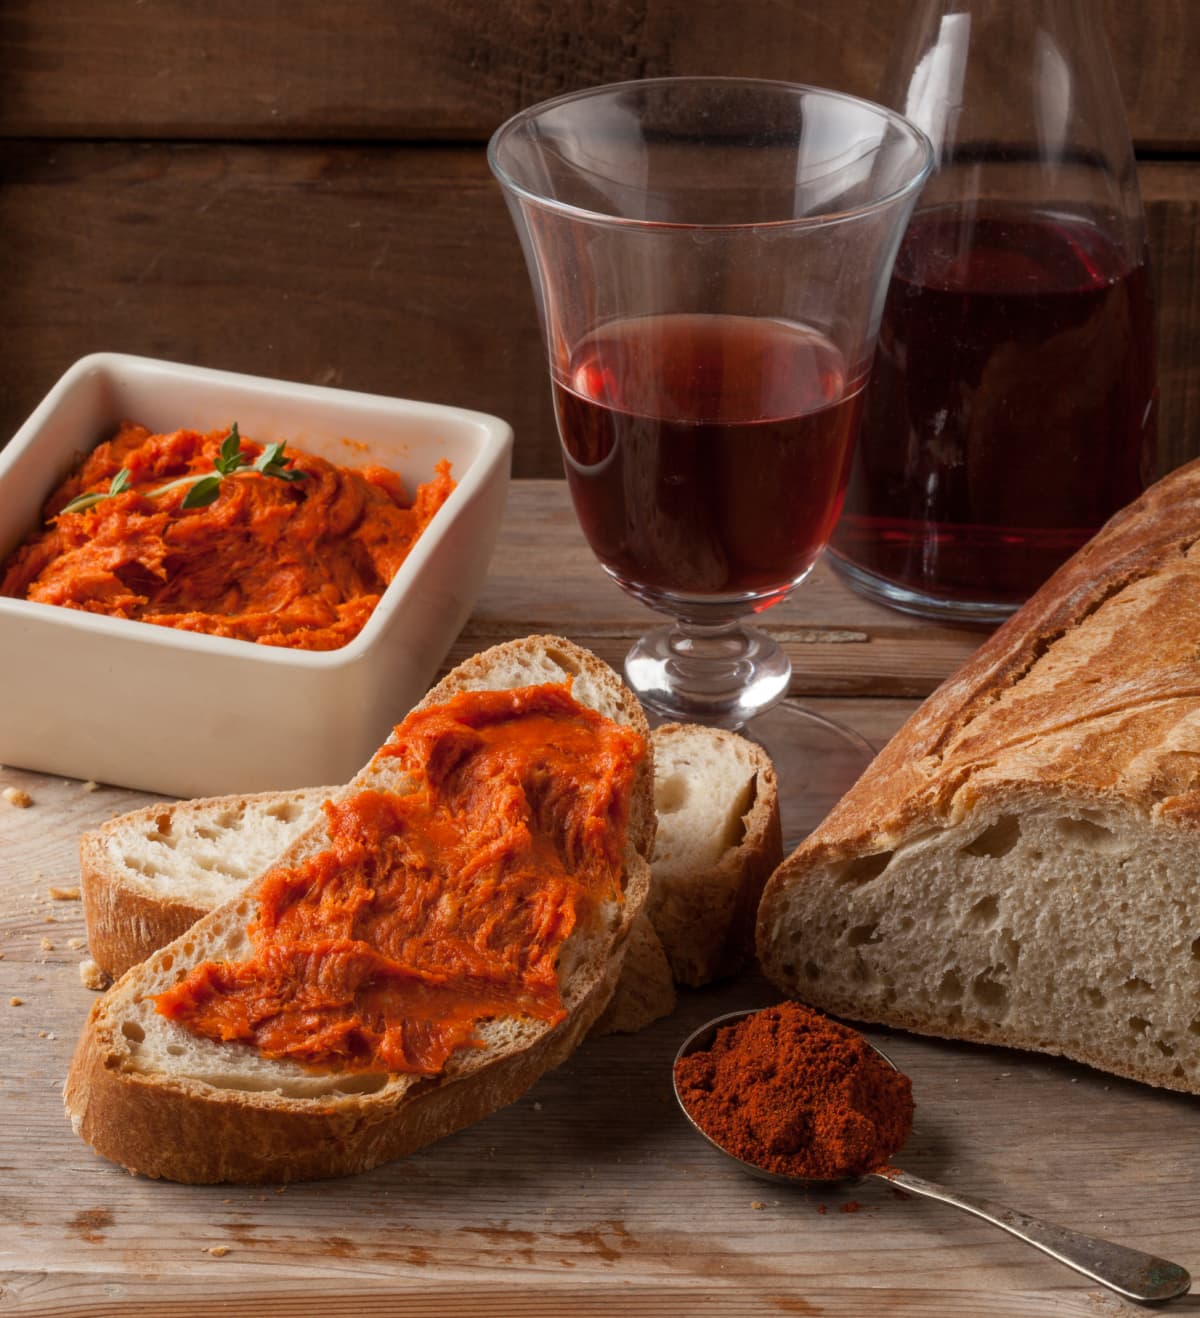 The 'Nduja is a particular type of sausage of the Calabrian tradition.